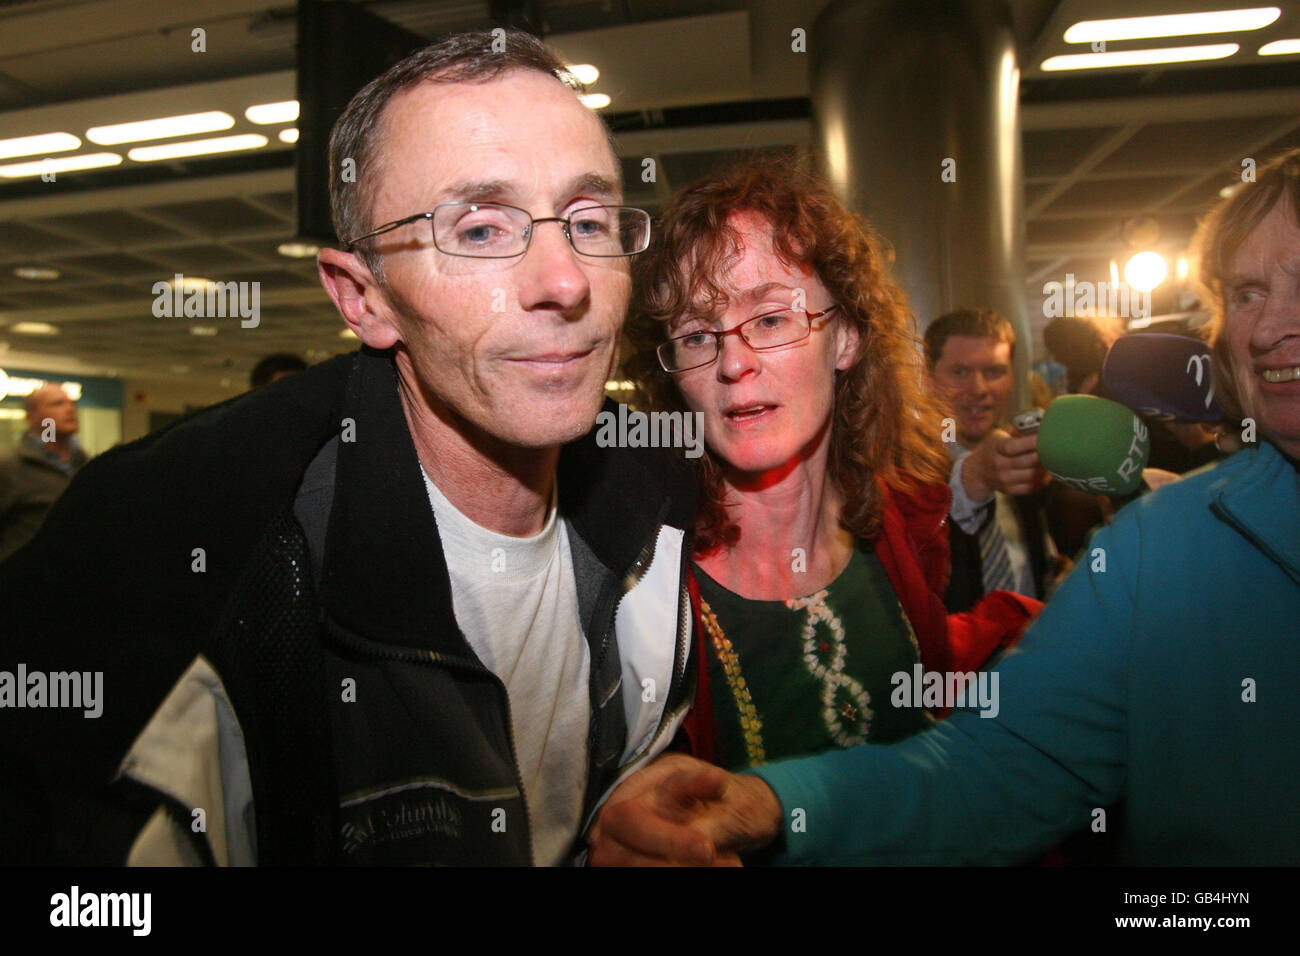 Dubliners Oisin and Liz Neary, who were among twenty trainees and five crew were rescued from life rafts by the French coastguard after the Asgard II went down 20 nautical miles off the coast of France in the Bay of Biscay, arrive back at Dublin airport. Stock Photo